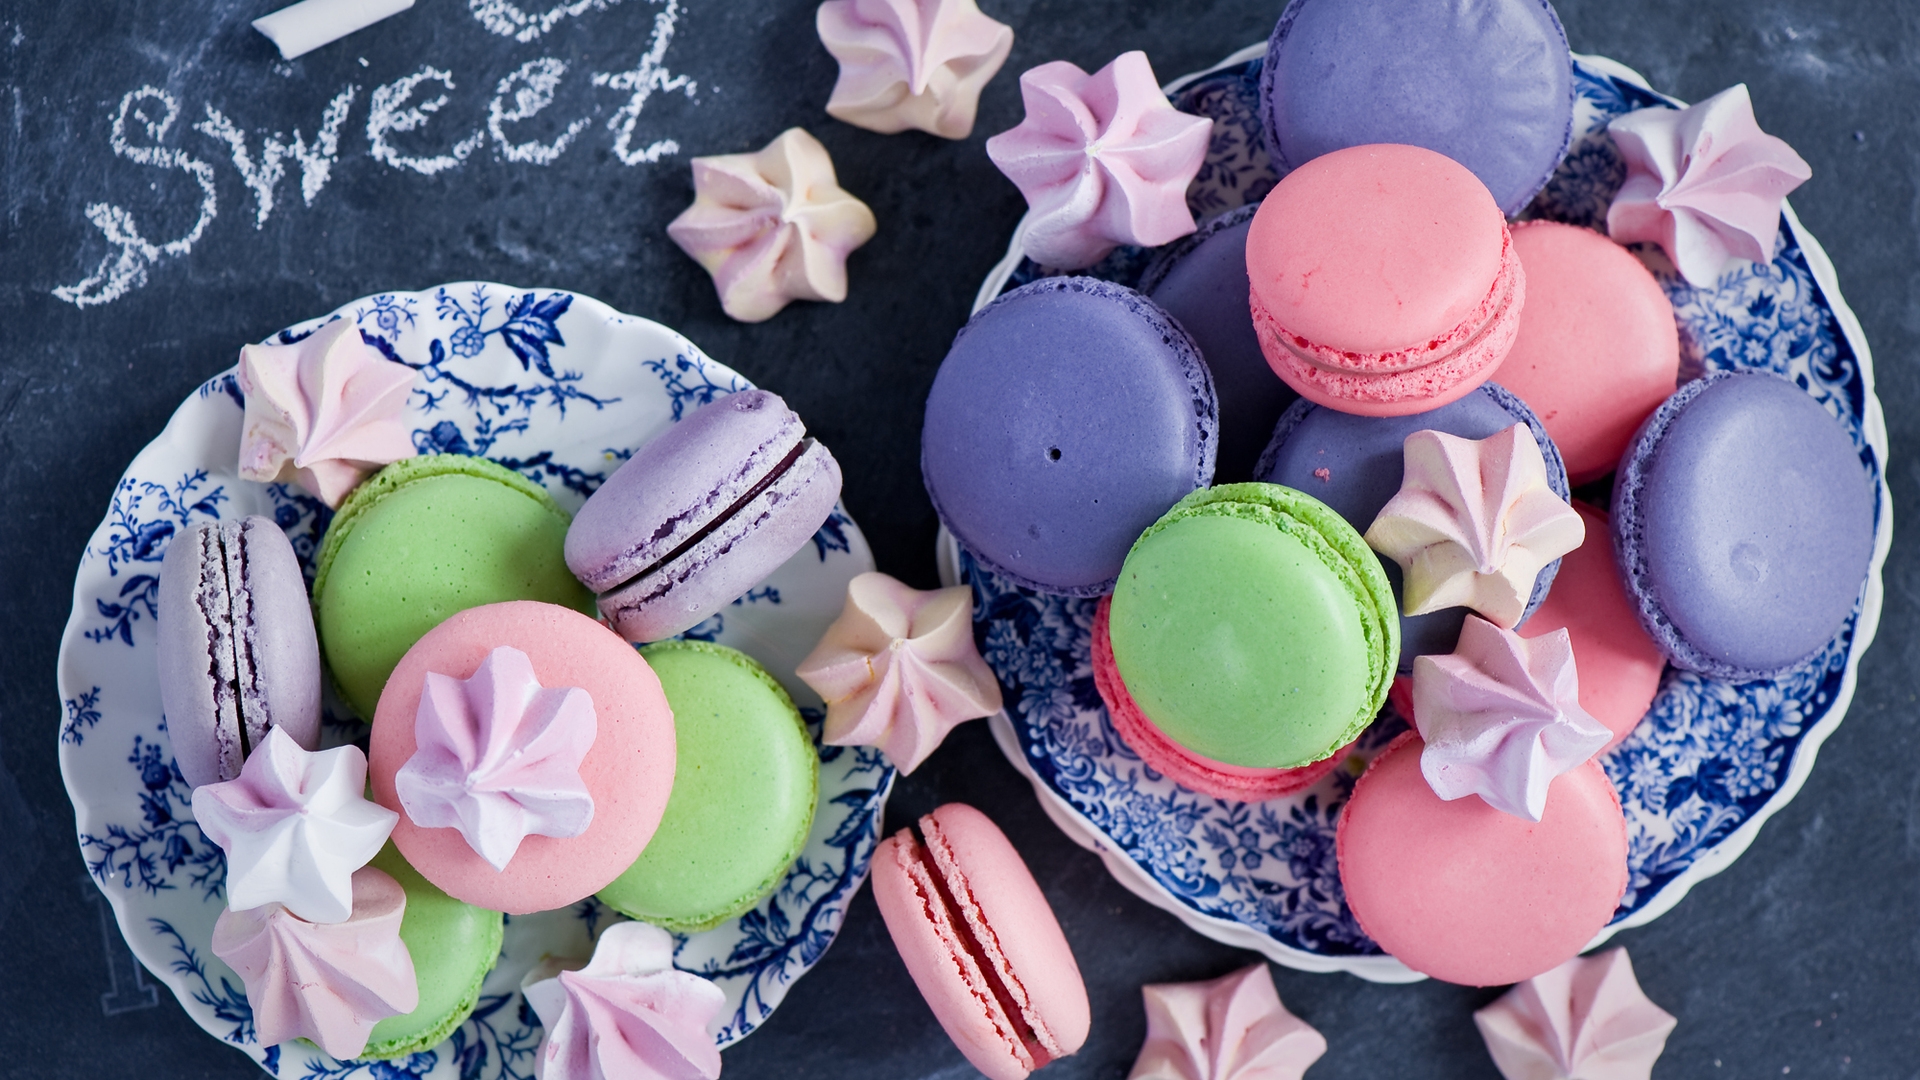 Macarons and Meringues for 1920 x 1080 HDTV 1080p resolution